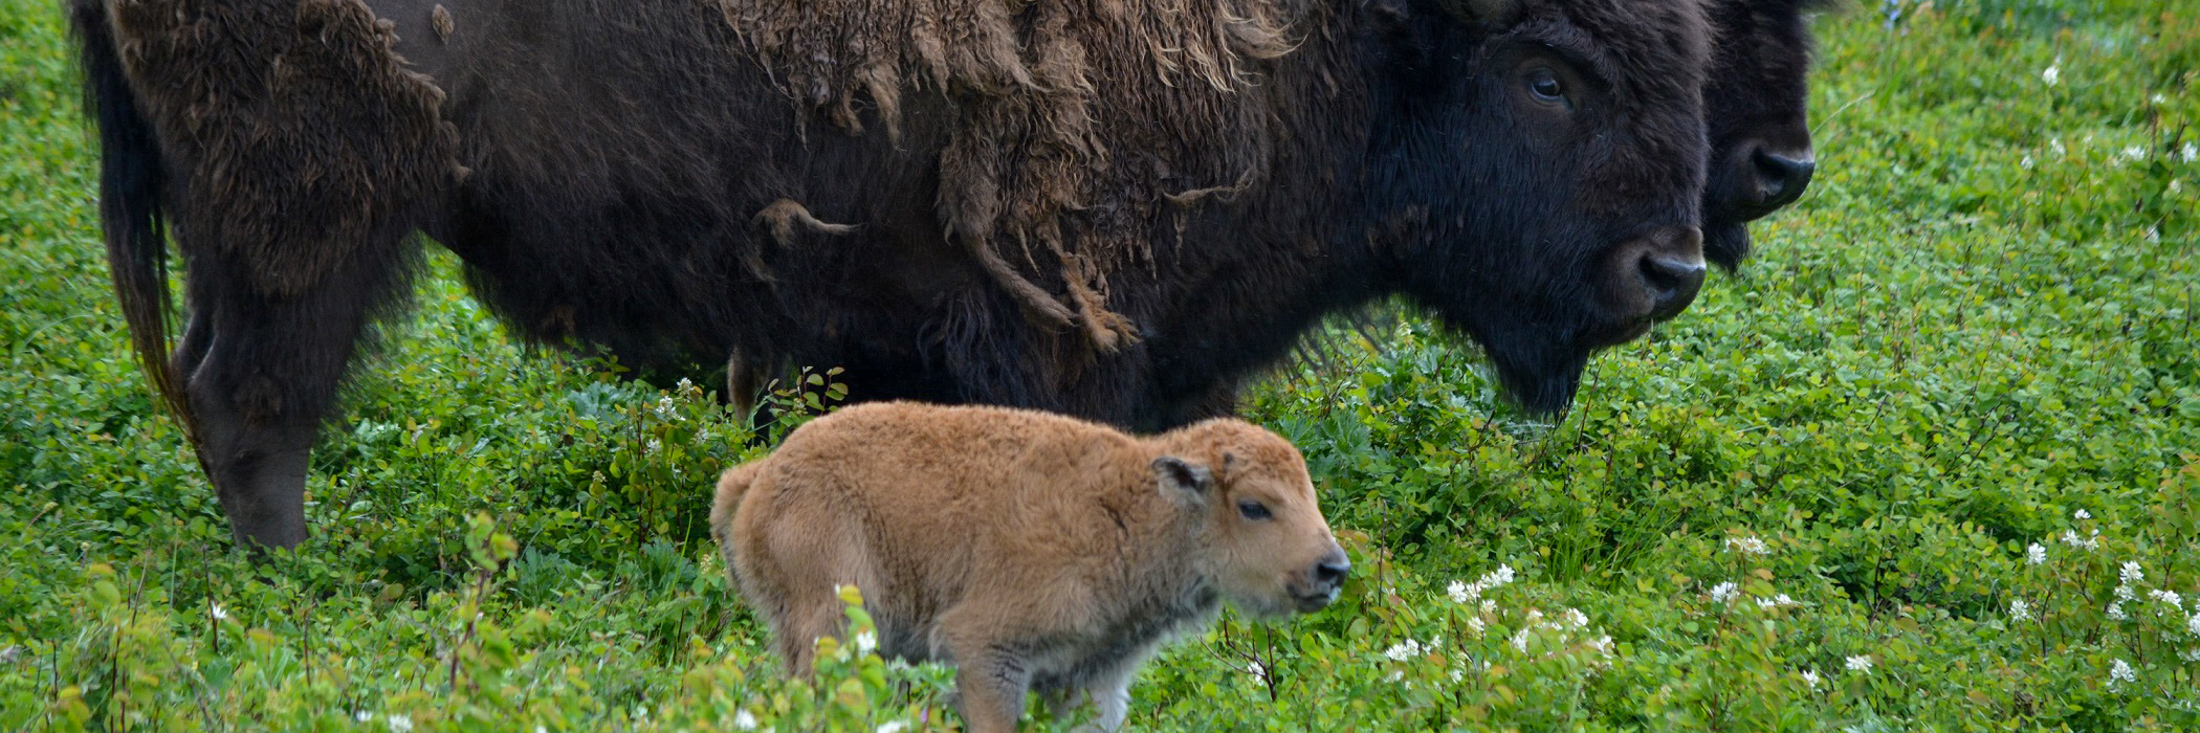 Two bison and a baby bison stand in a field of grass